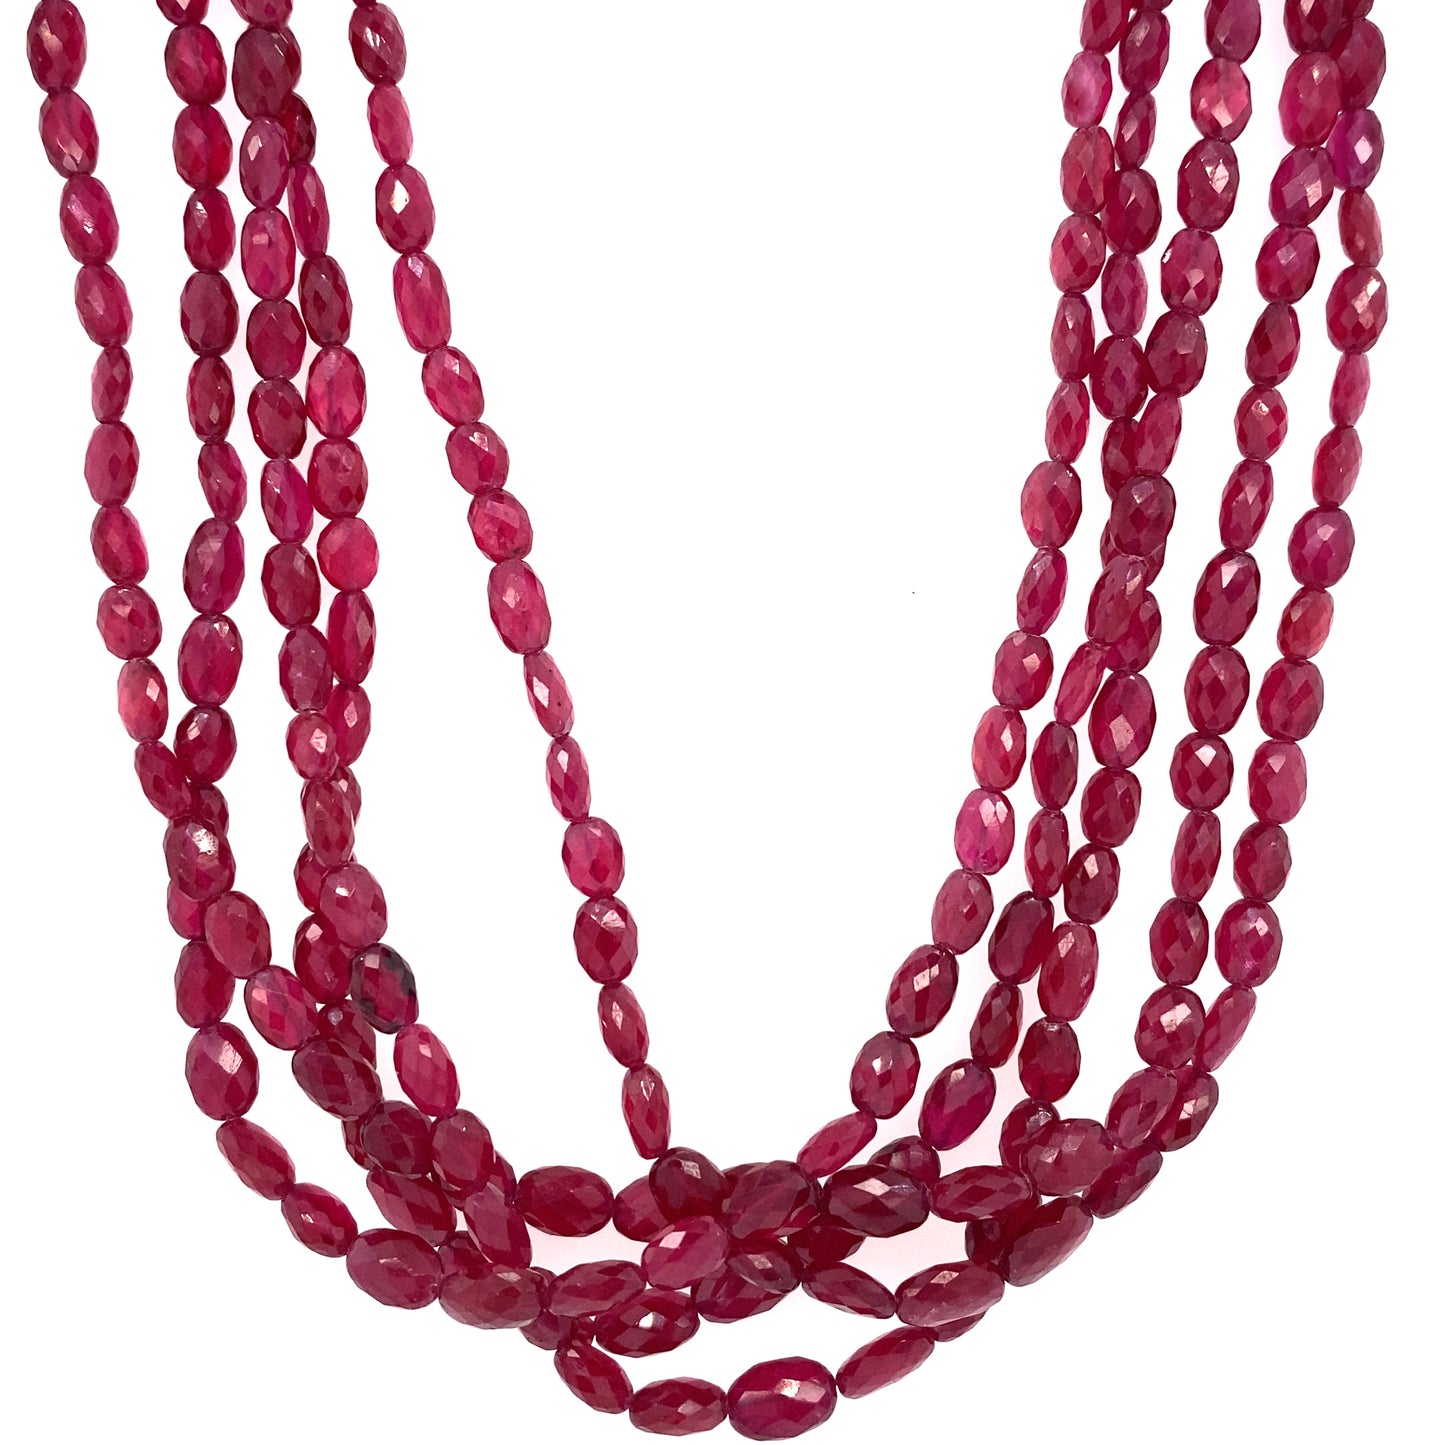 Circa 1990s Five Strand Faceted Ruby Bead Necklace with 18k Gold Magnetic Clasp